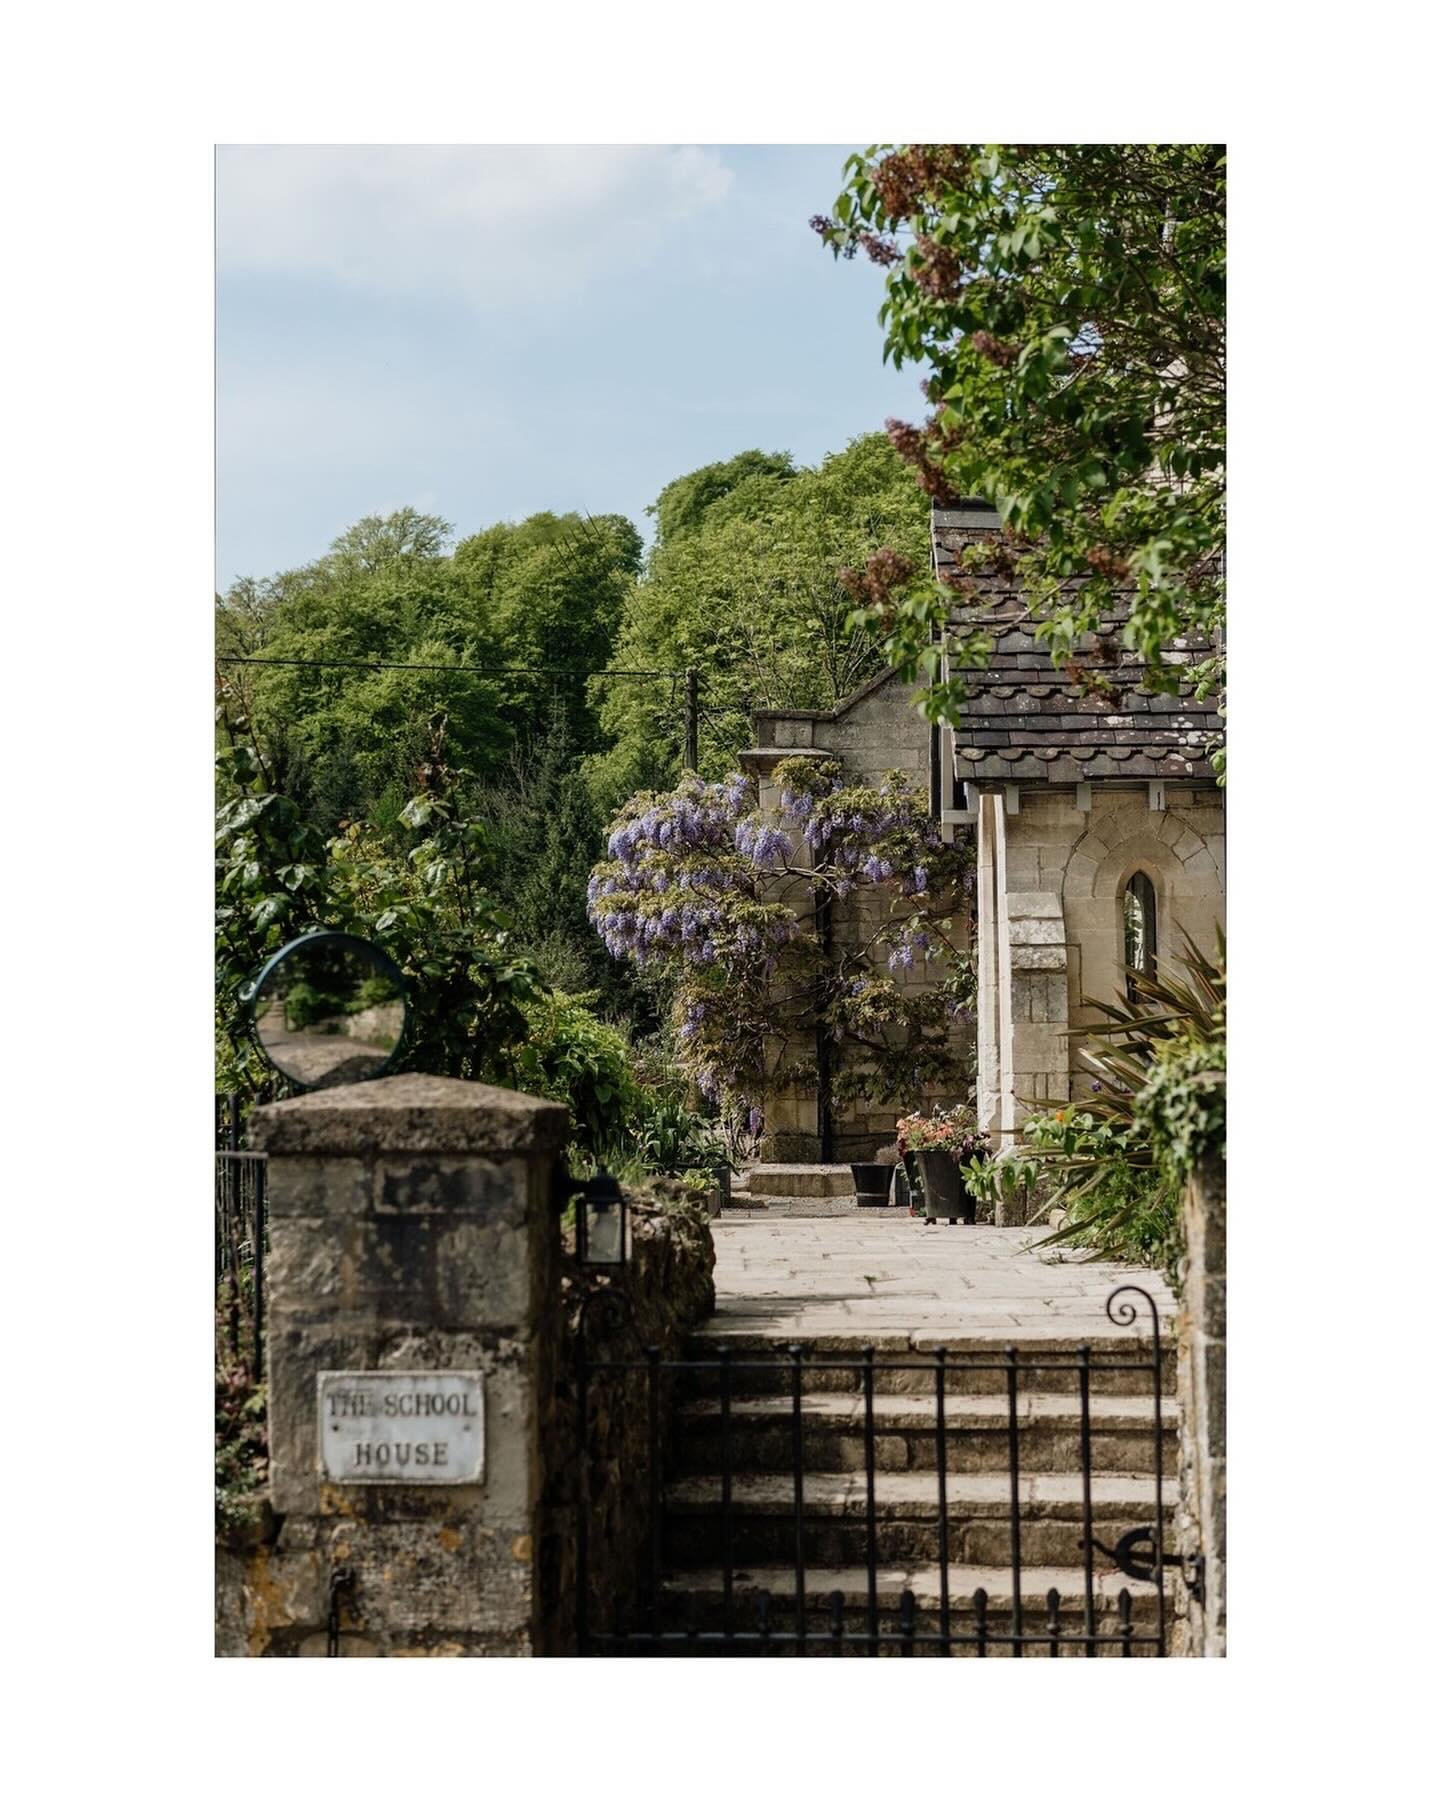 The beauty of the Slad valley in the Cotswolds&hellip;

#cotswoldlife #sladvalley #laurieleecountry #countryliving